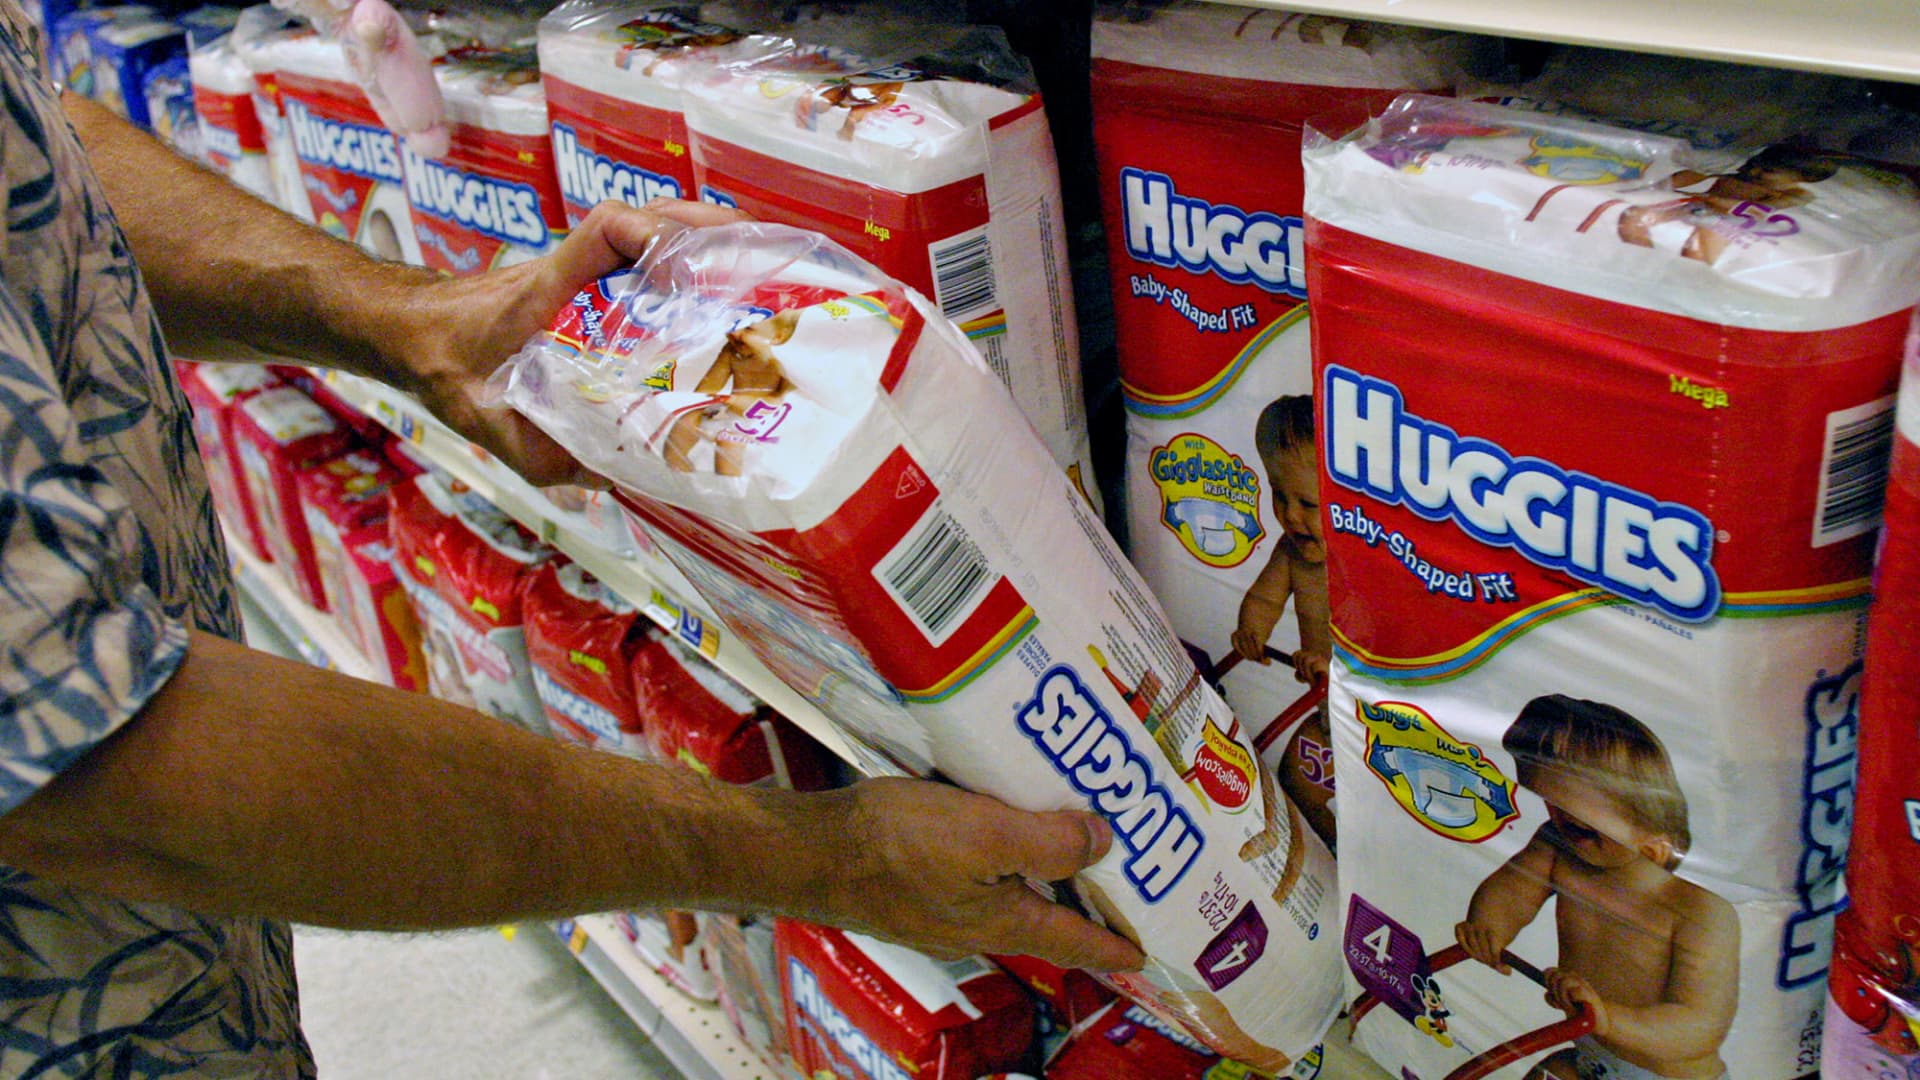 Higher commodity costs lead to price hikes from Kimberly-Clark and other consumer giants